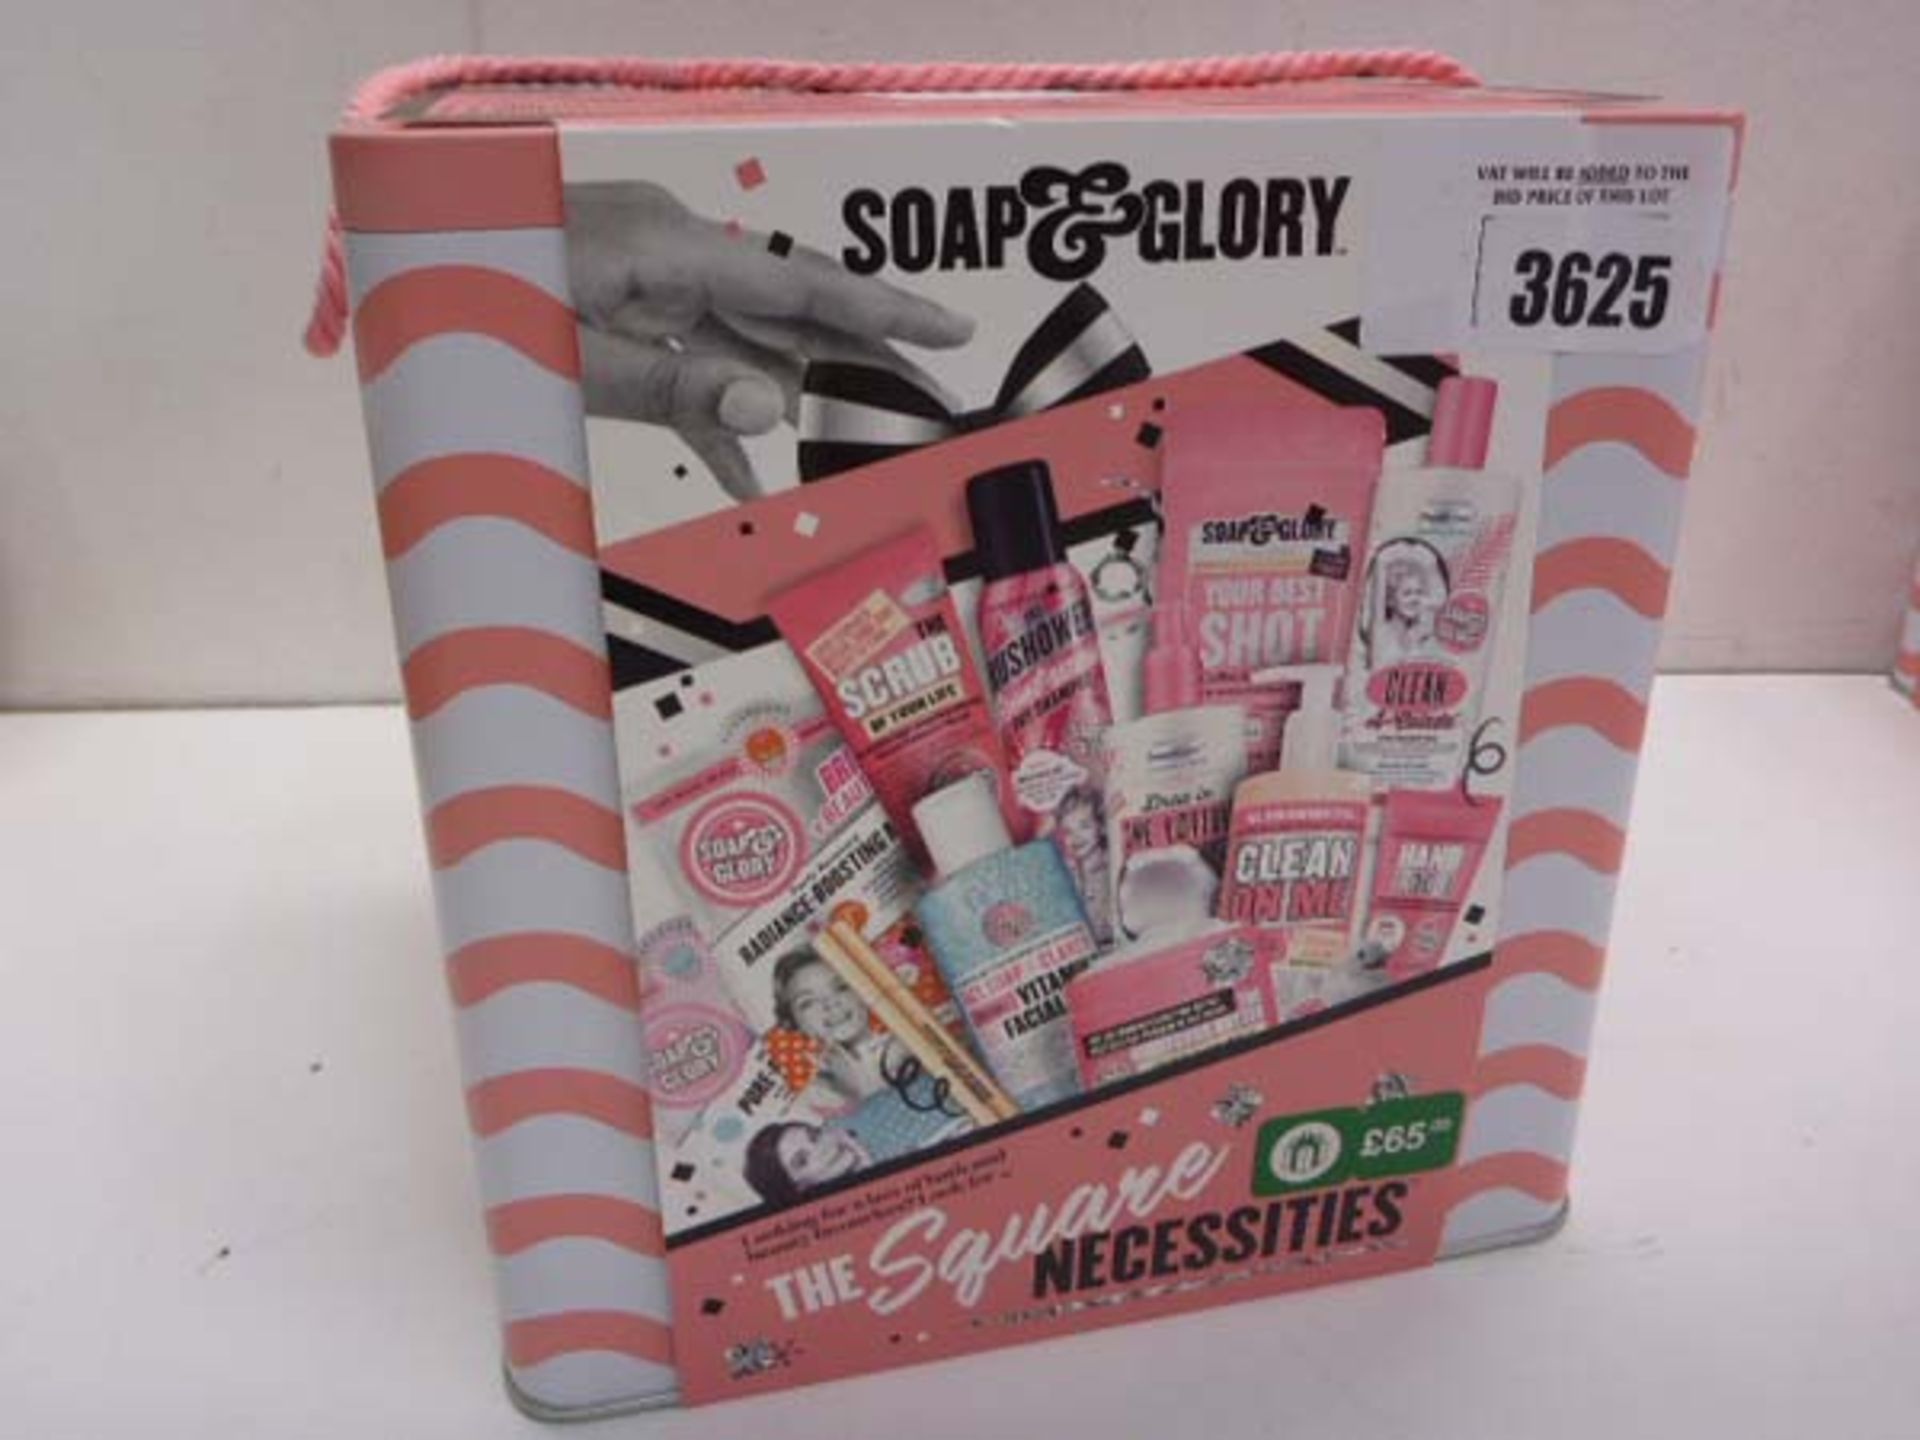 Soap & Glory The Square Necessities 12 piece gift set